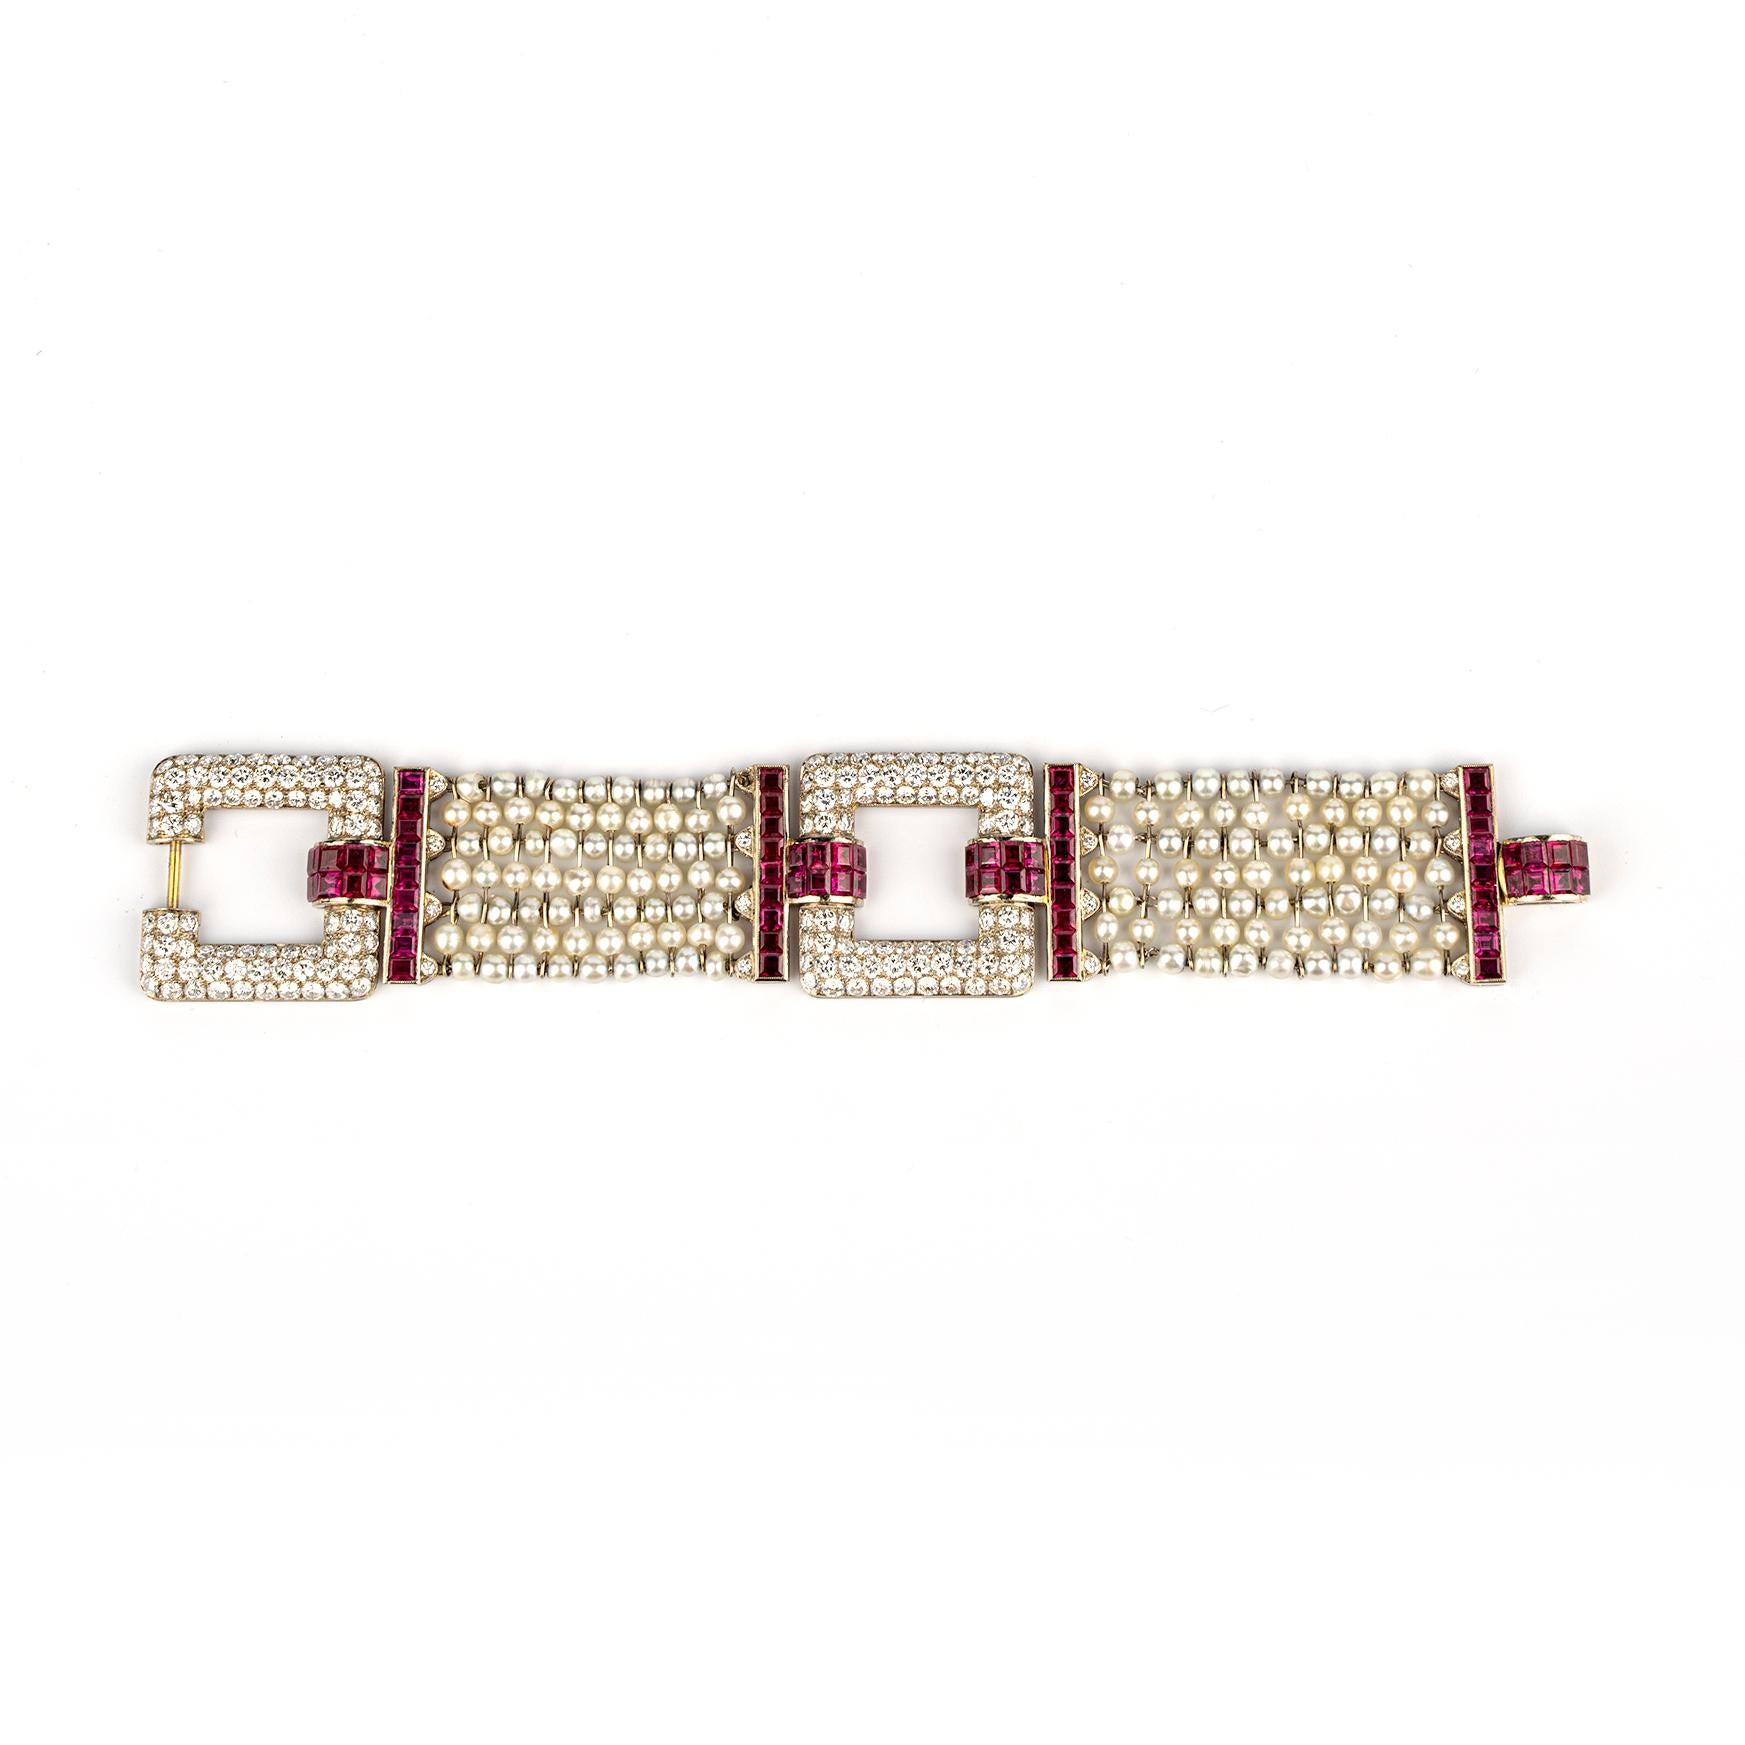  Art Deco Pearl, Ruby and Diamond Evening Bracelet In Excellent Condition For Sale In New York, NY